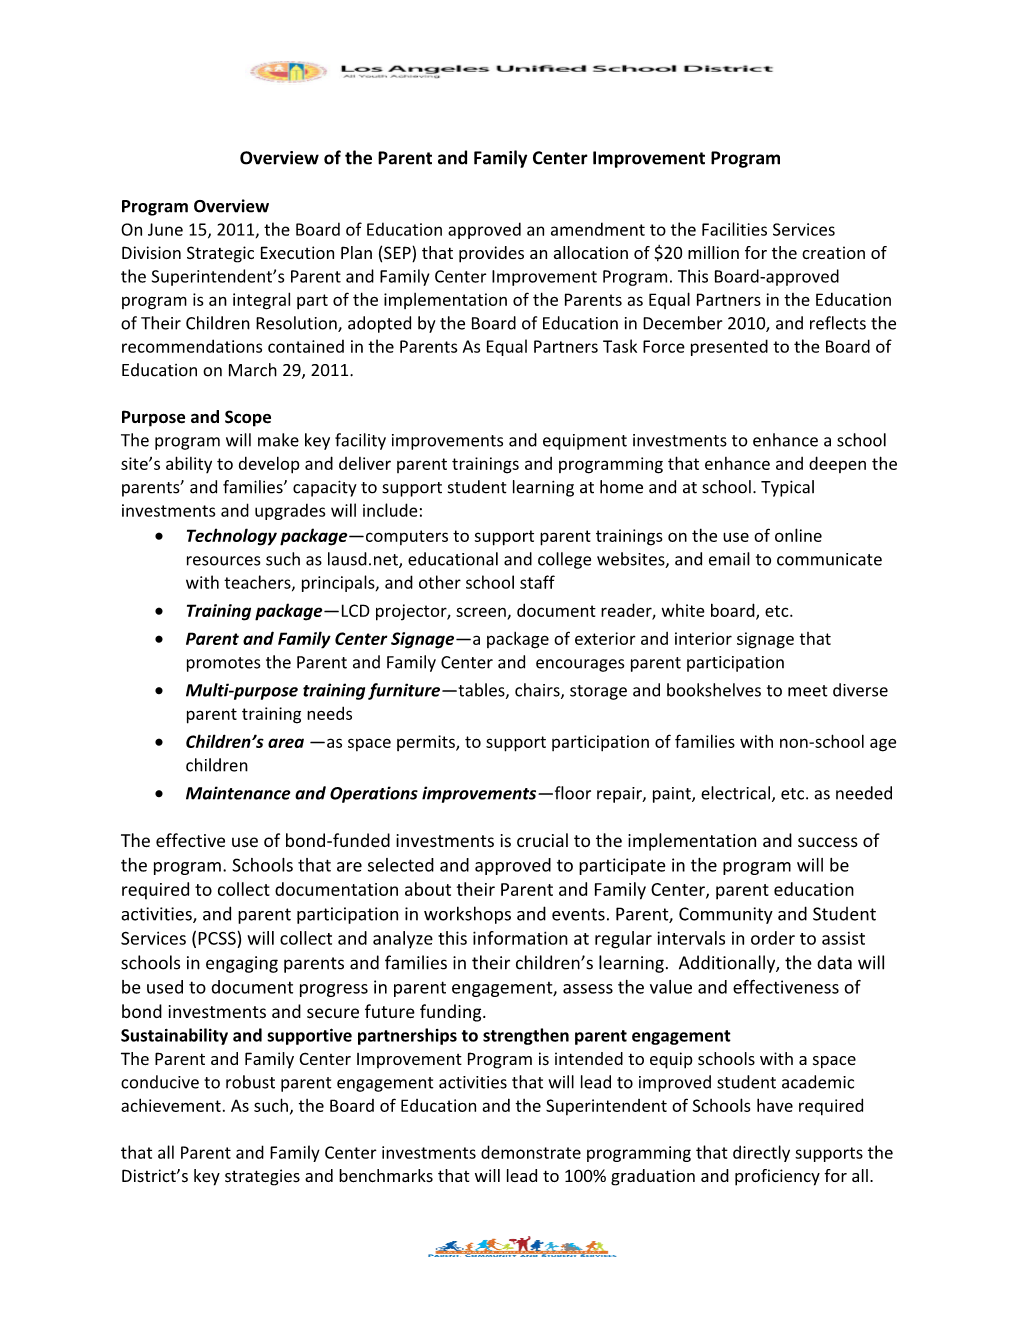 Overview of the Parent and Family Center Improvement Program